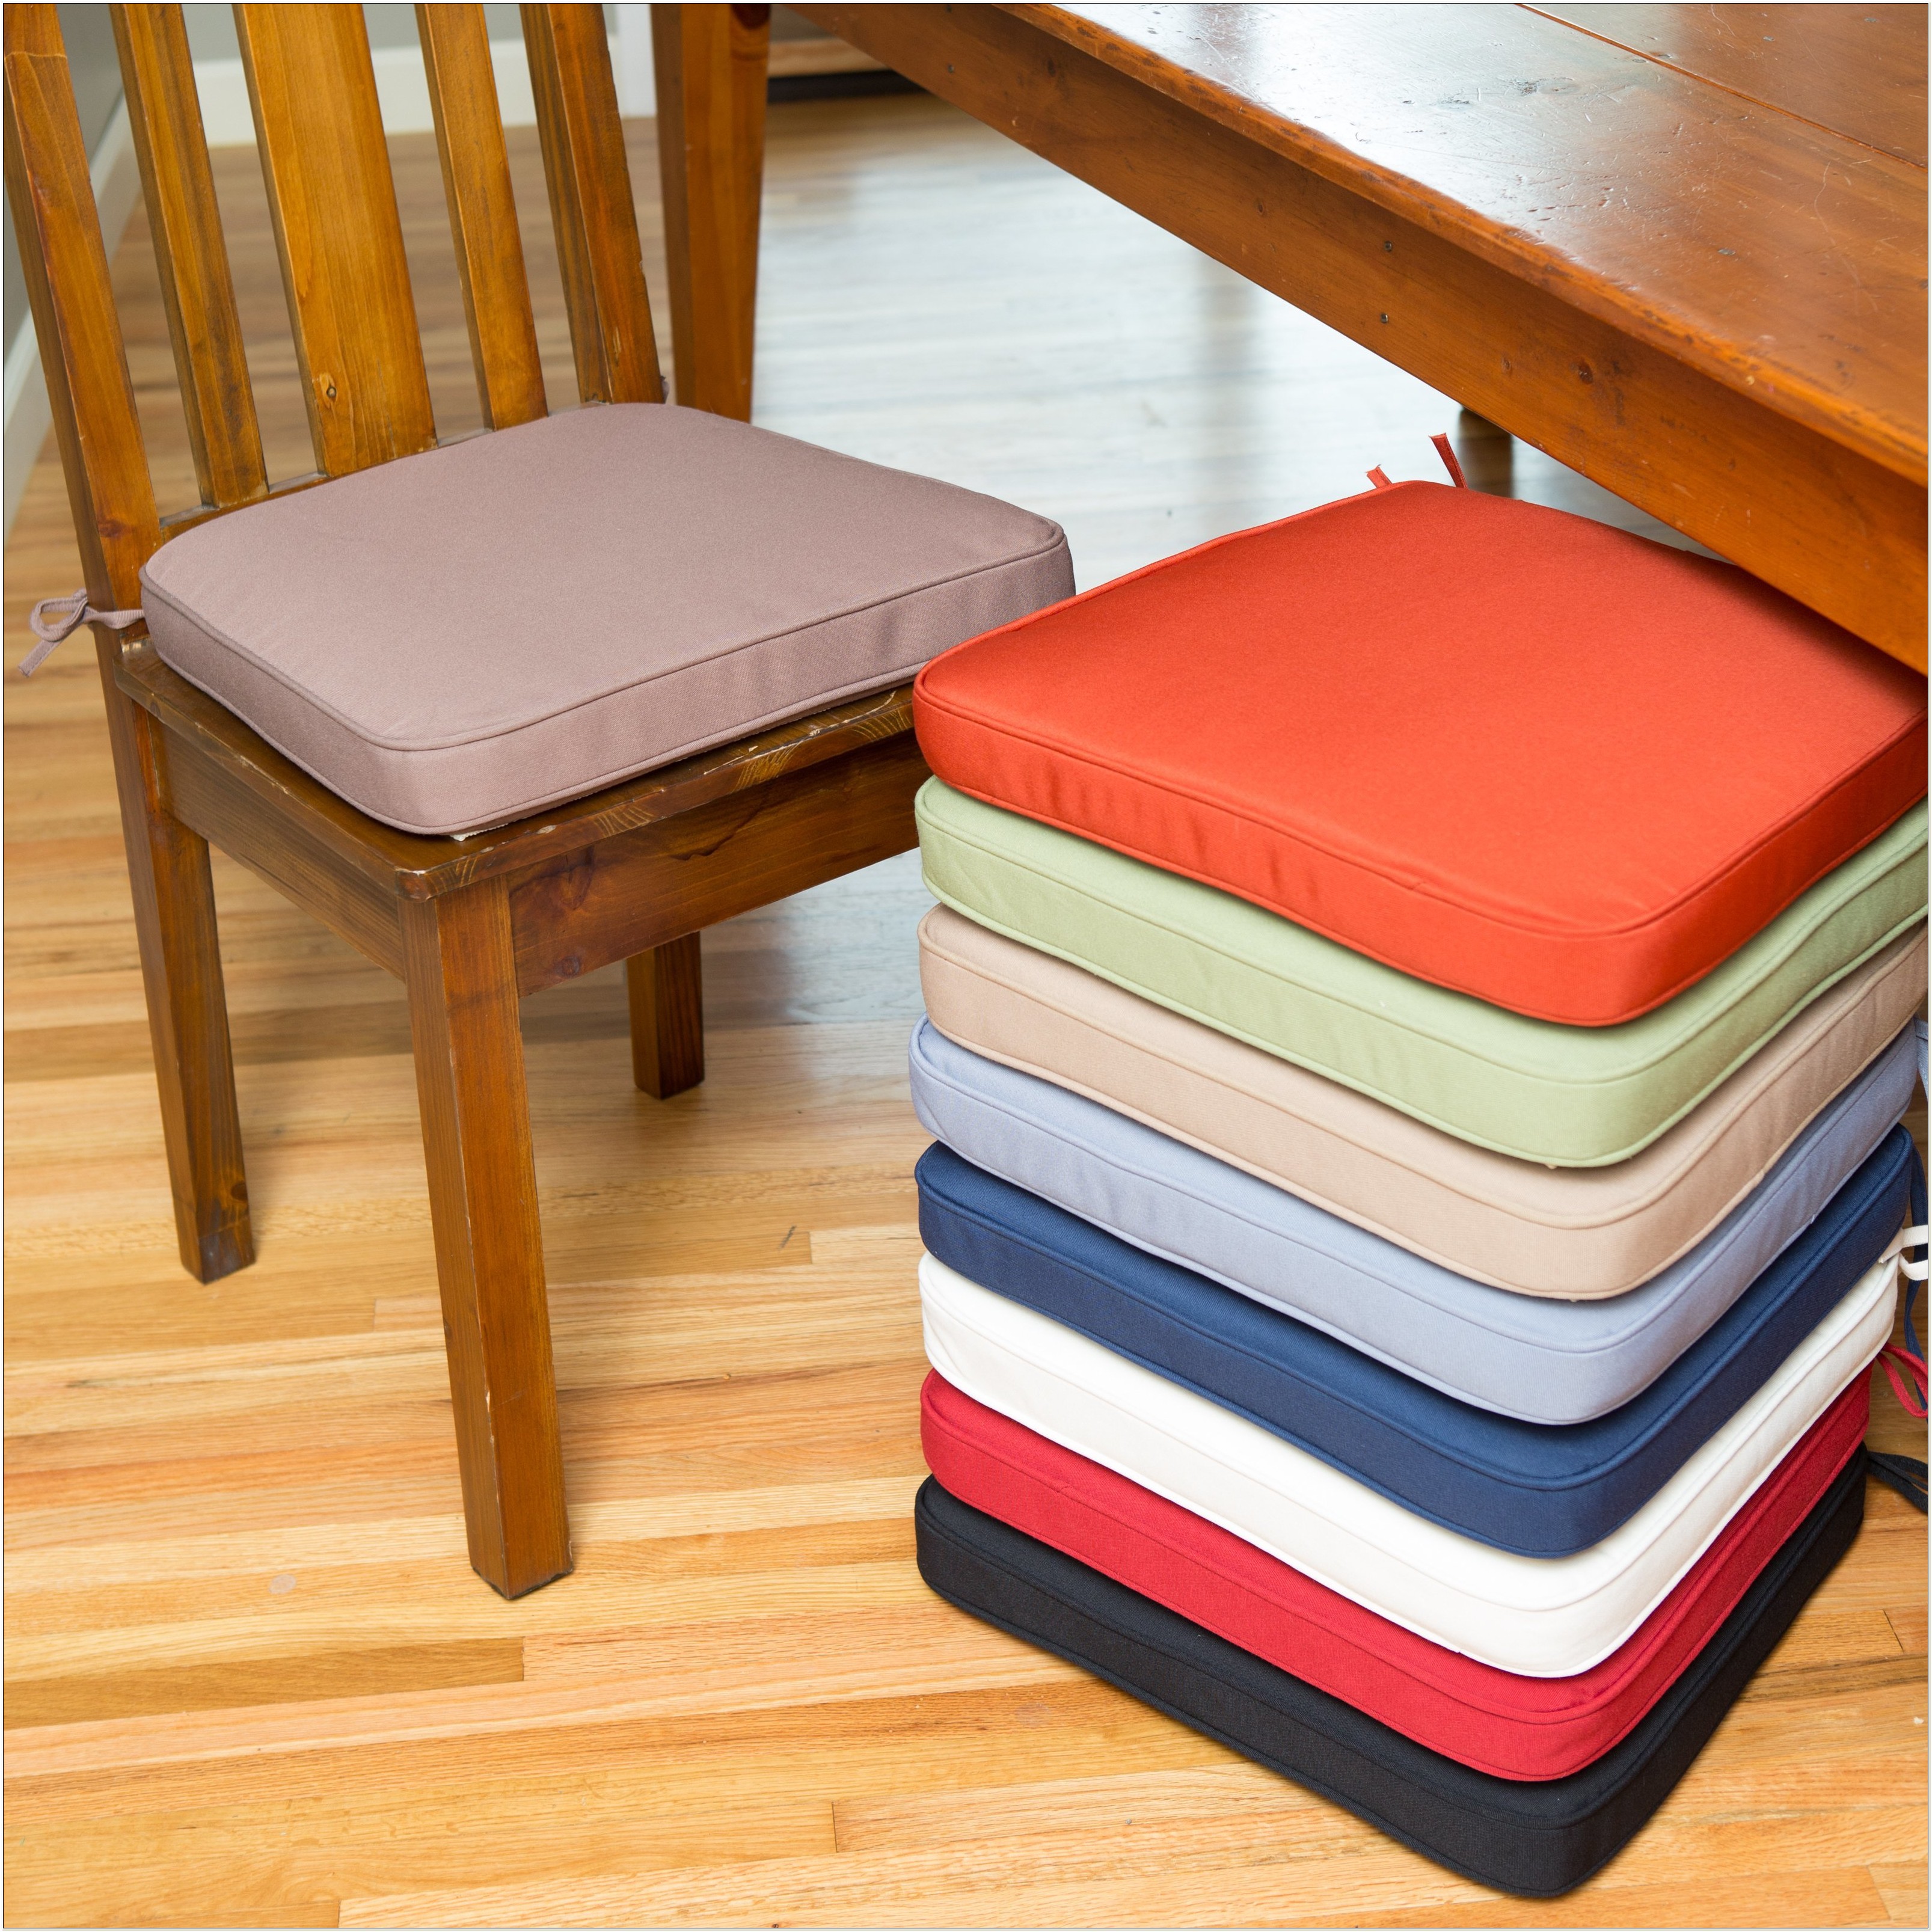 18 Inch Dining Chair Cushions - Chairs : Home Decorating Ideas #qy2B9pWlwa